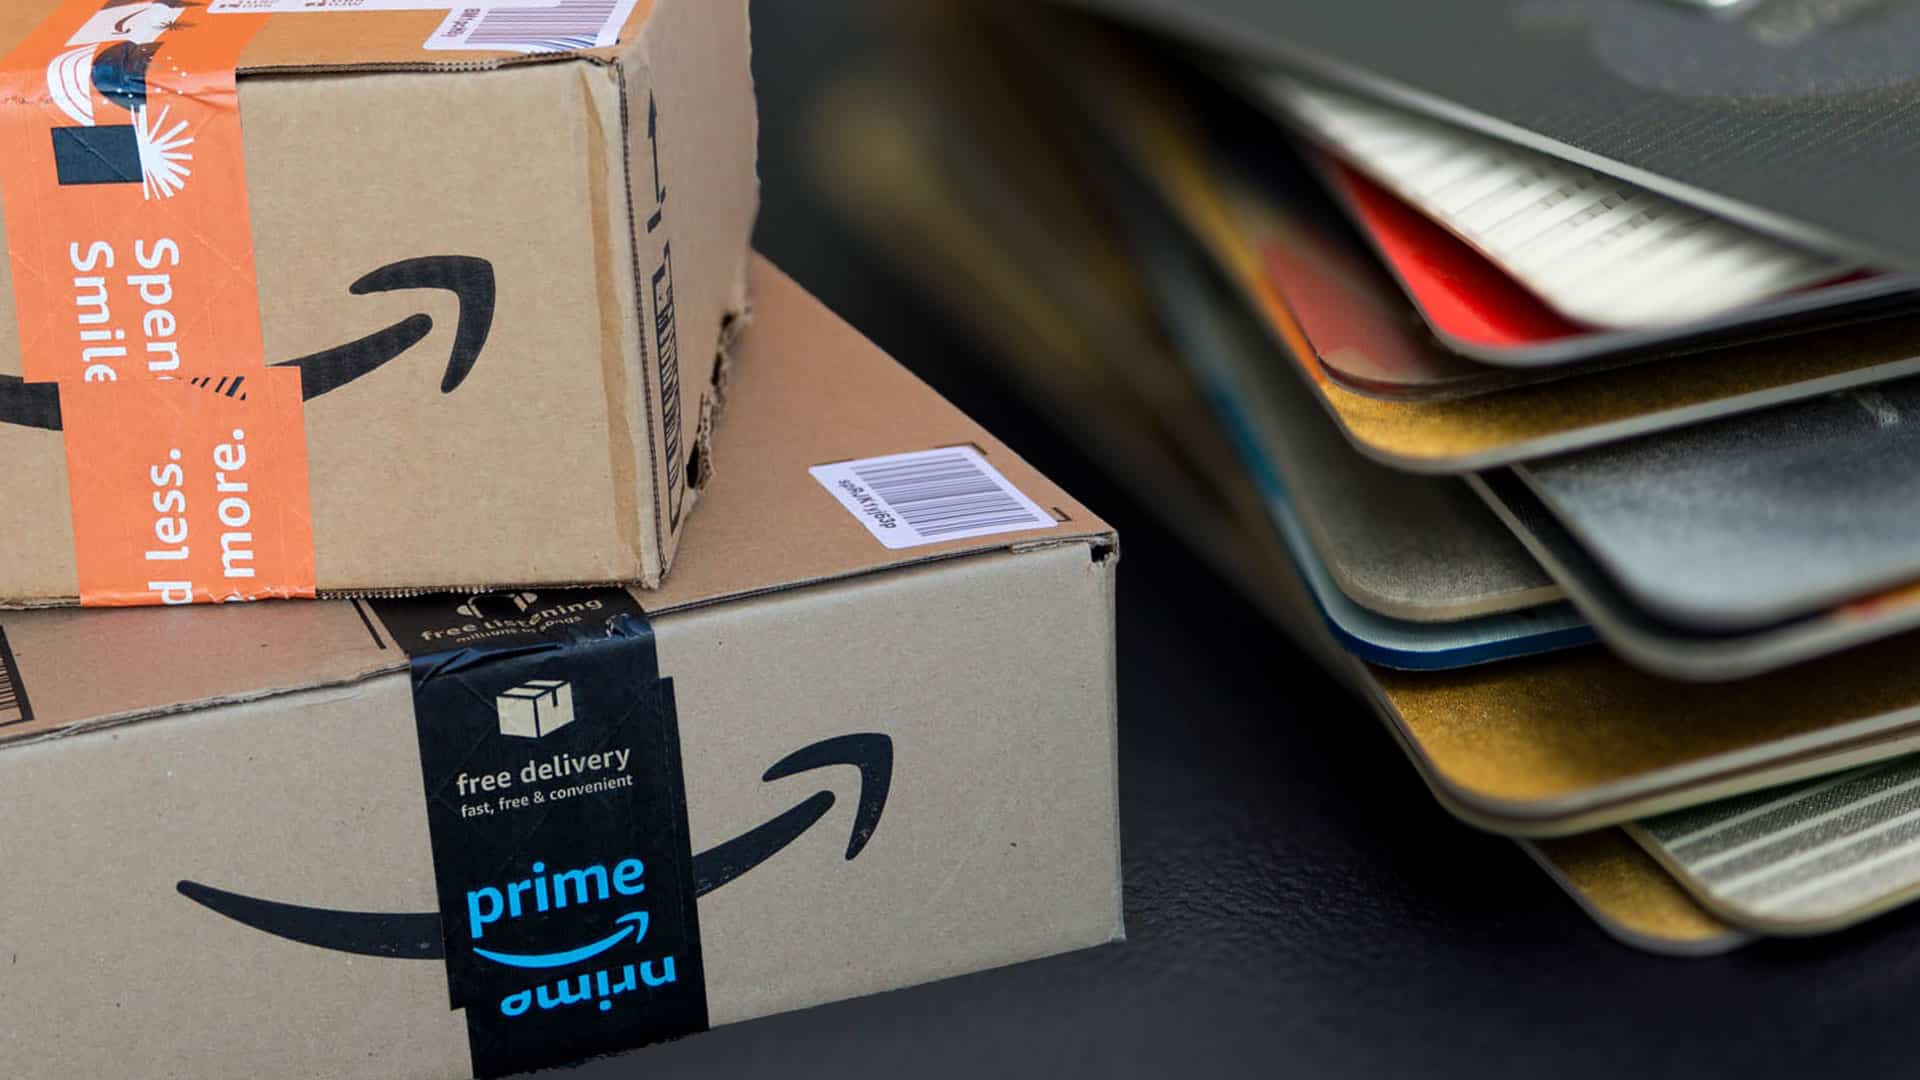 Amazon packages and a pile of gift cards